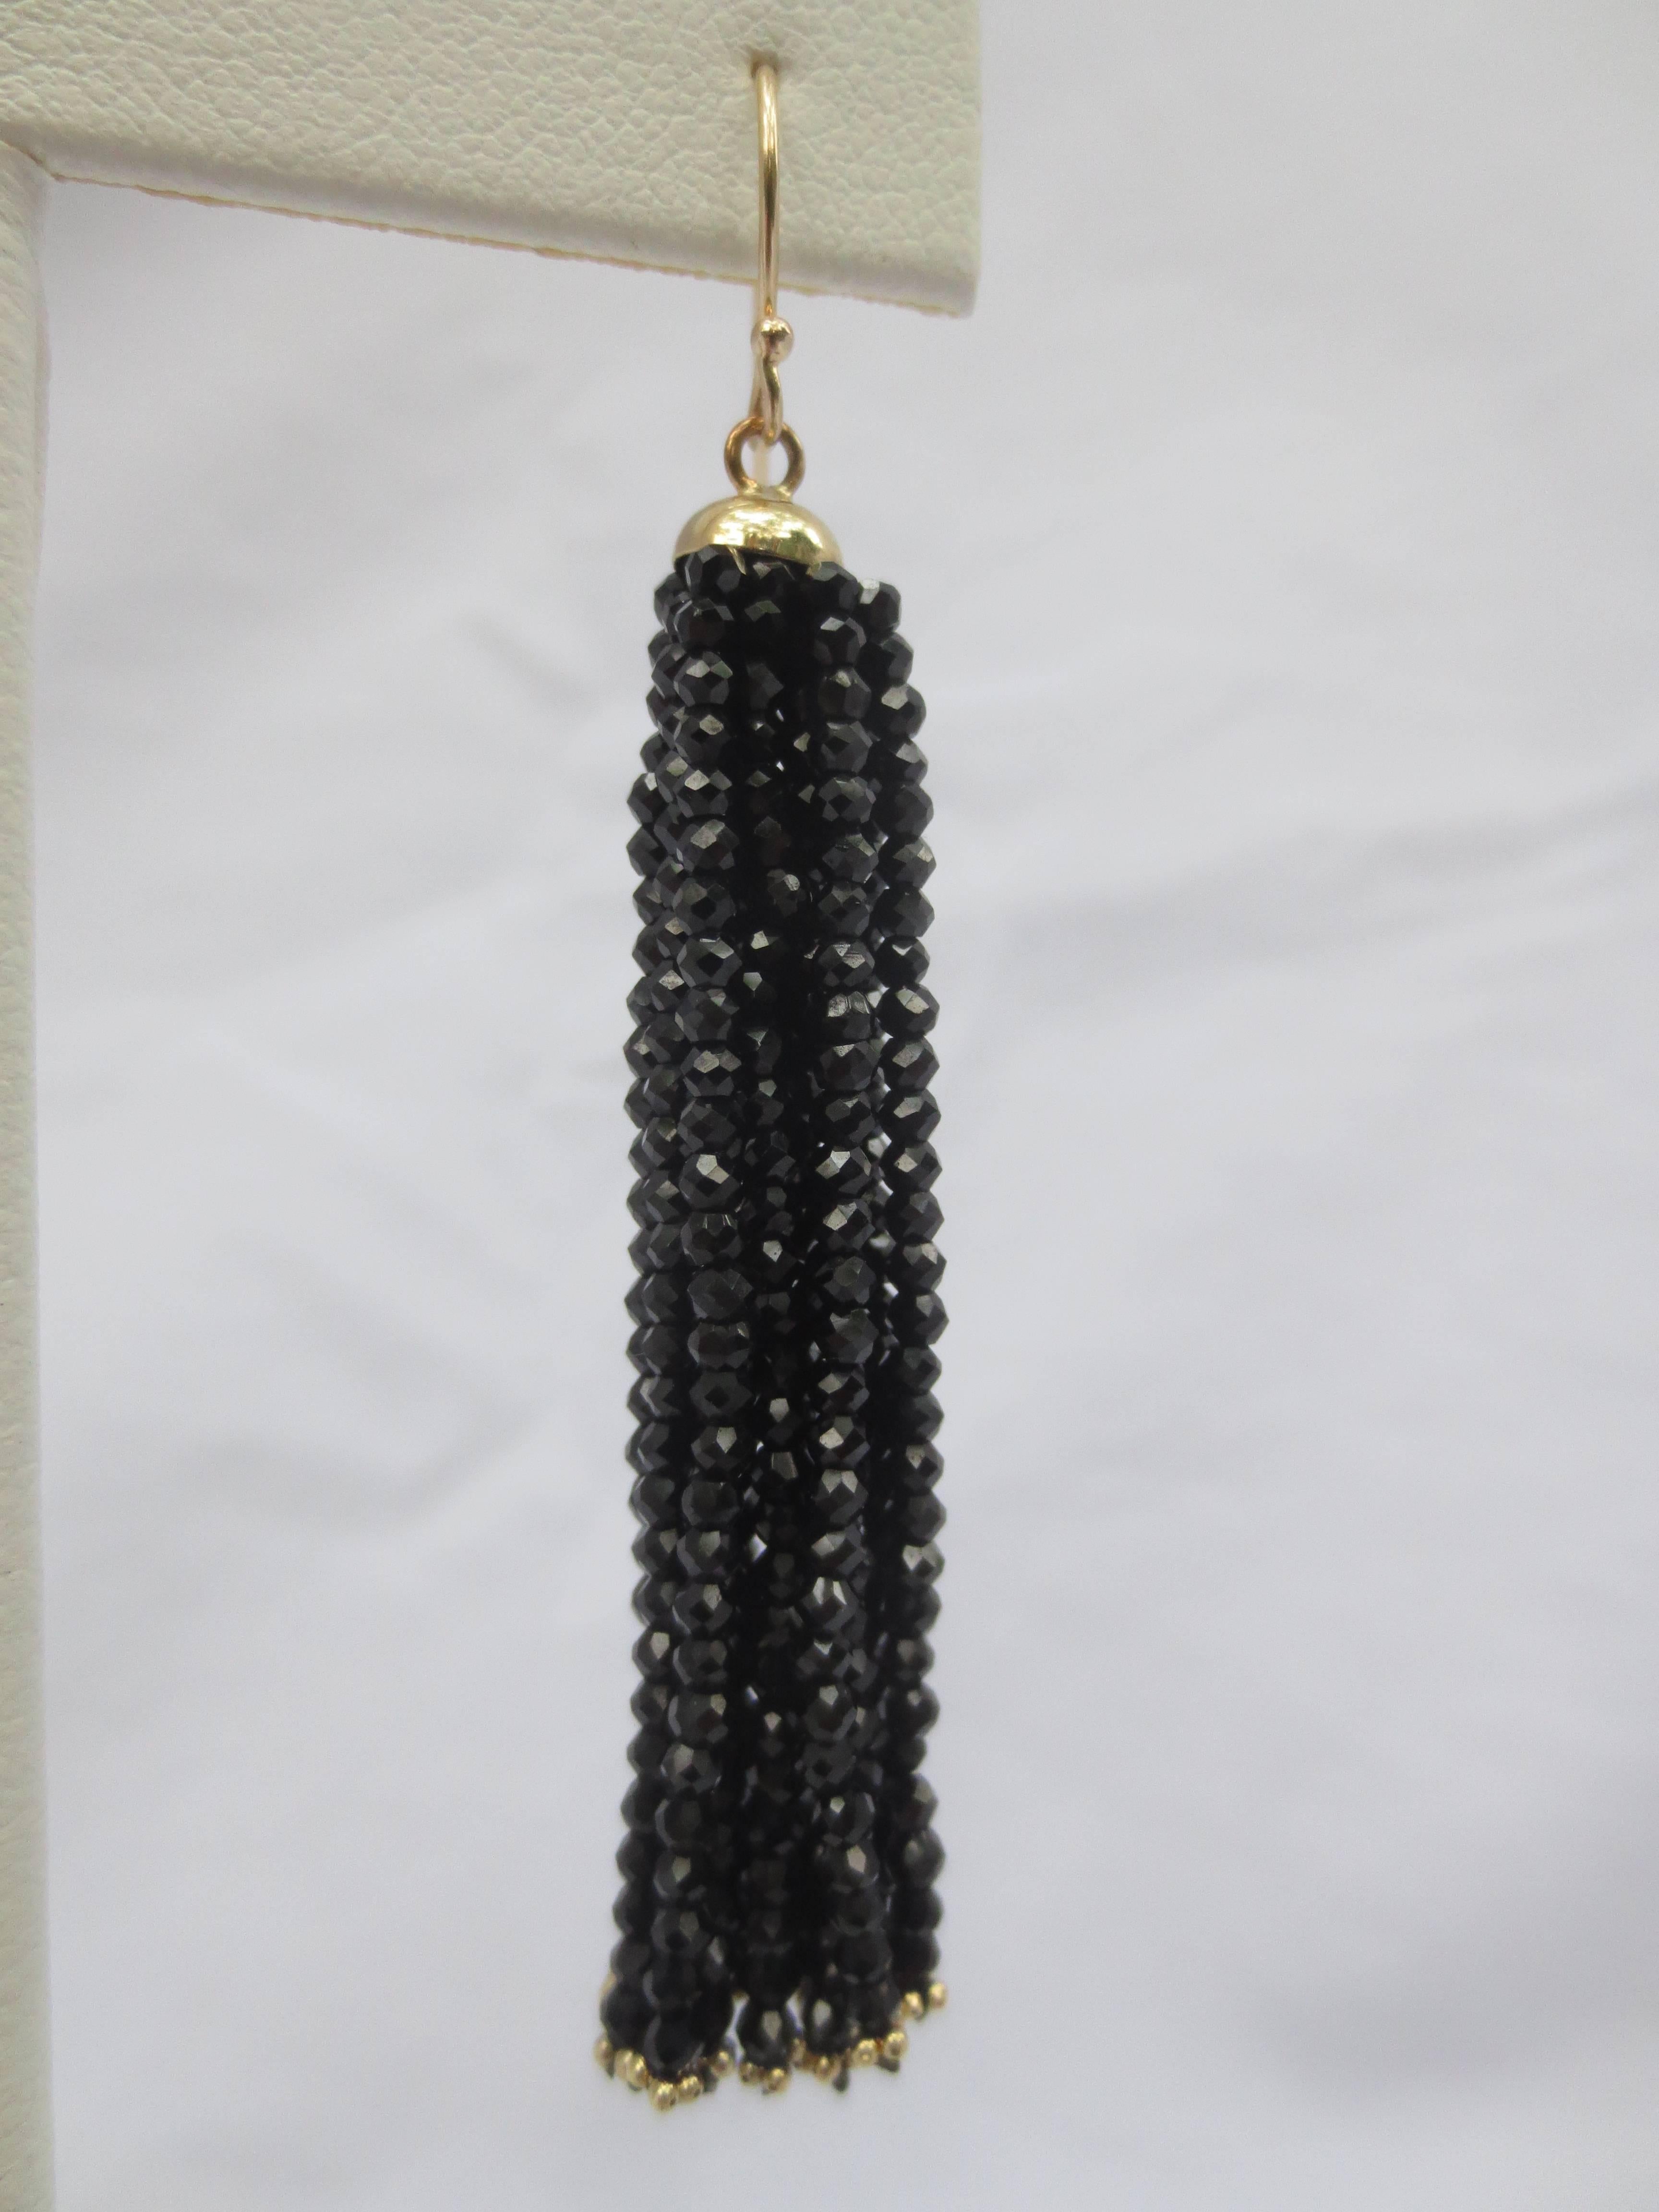 Measuring 2.5 inches long, these lightweight, elegant, and understated earrings will match well with any ensemble. Beaming from a 14 k Yellow Gold cup, the faceted Black Spinel beads reflect and dance in the light, and are finished with small Gold